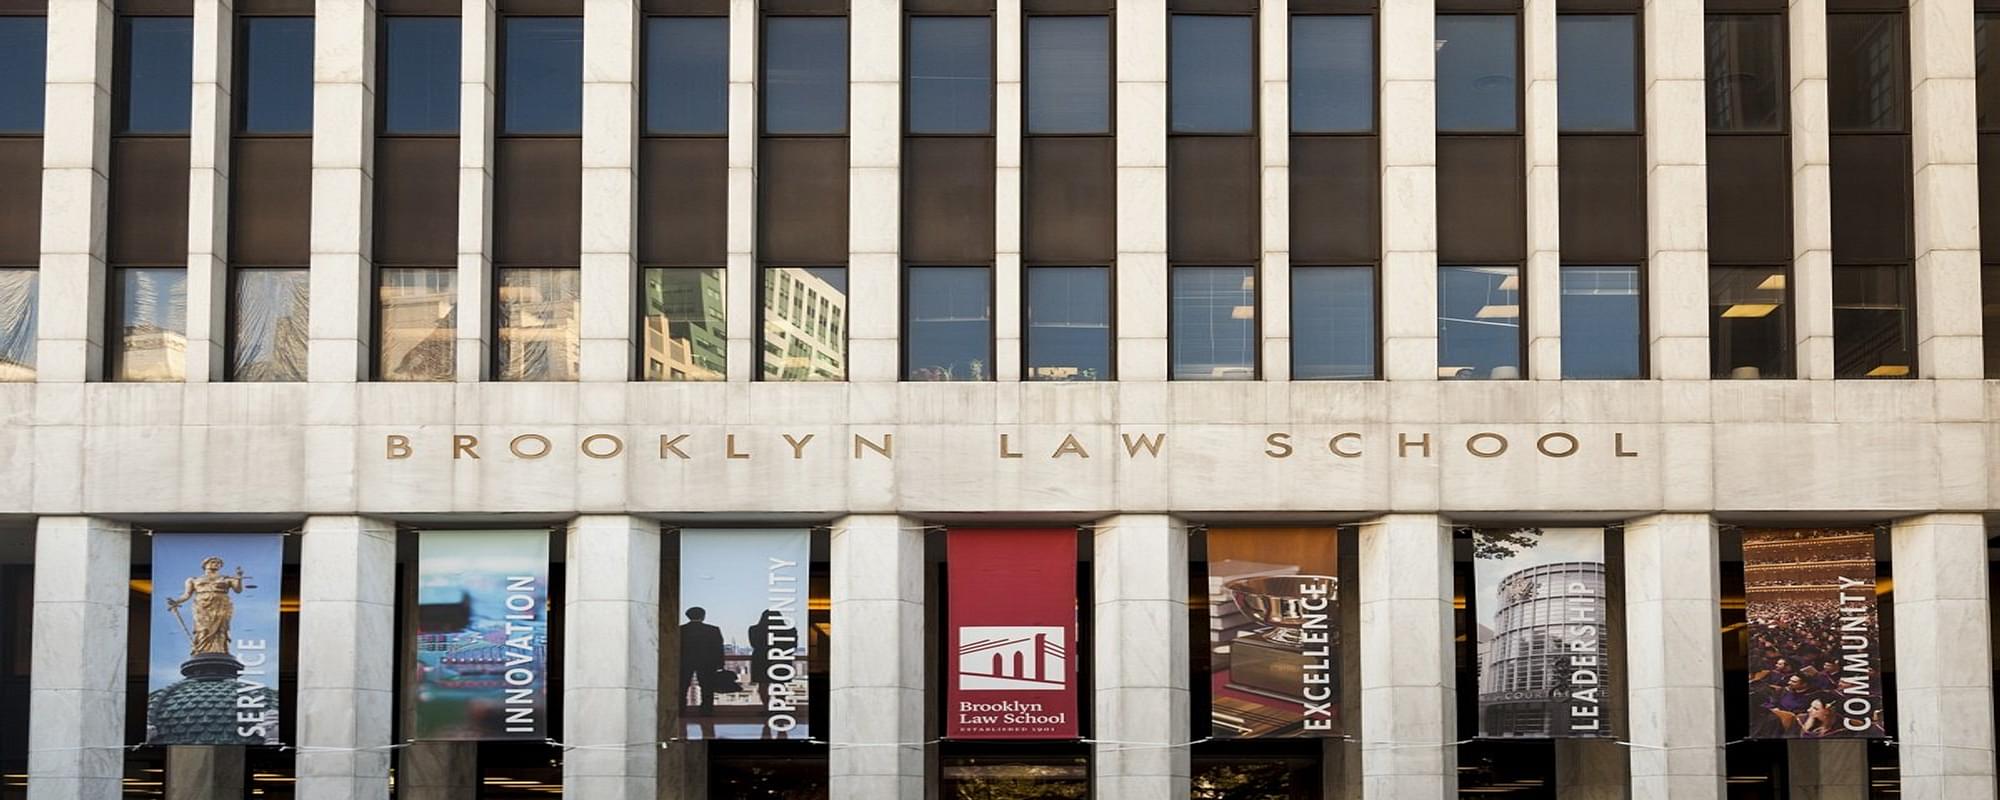 Brooklyn Law School: Rankings, Courses, Admissions, Tuition Fee, Cost of  Attendance & Scholarships